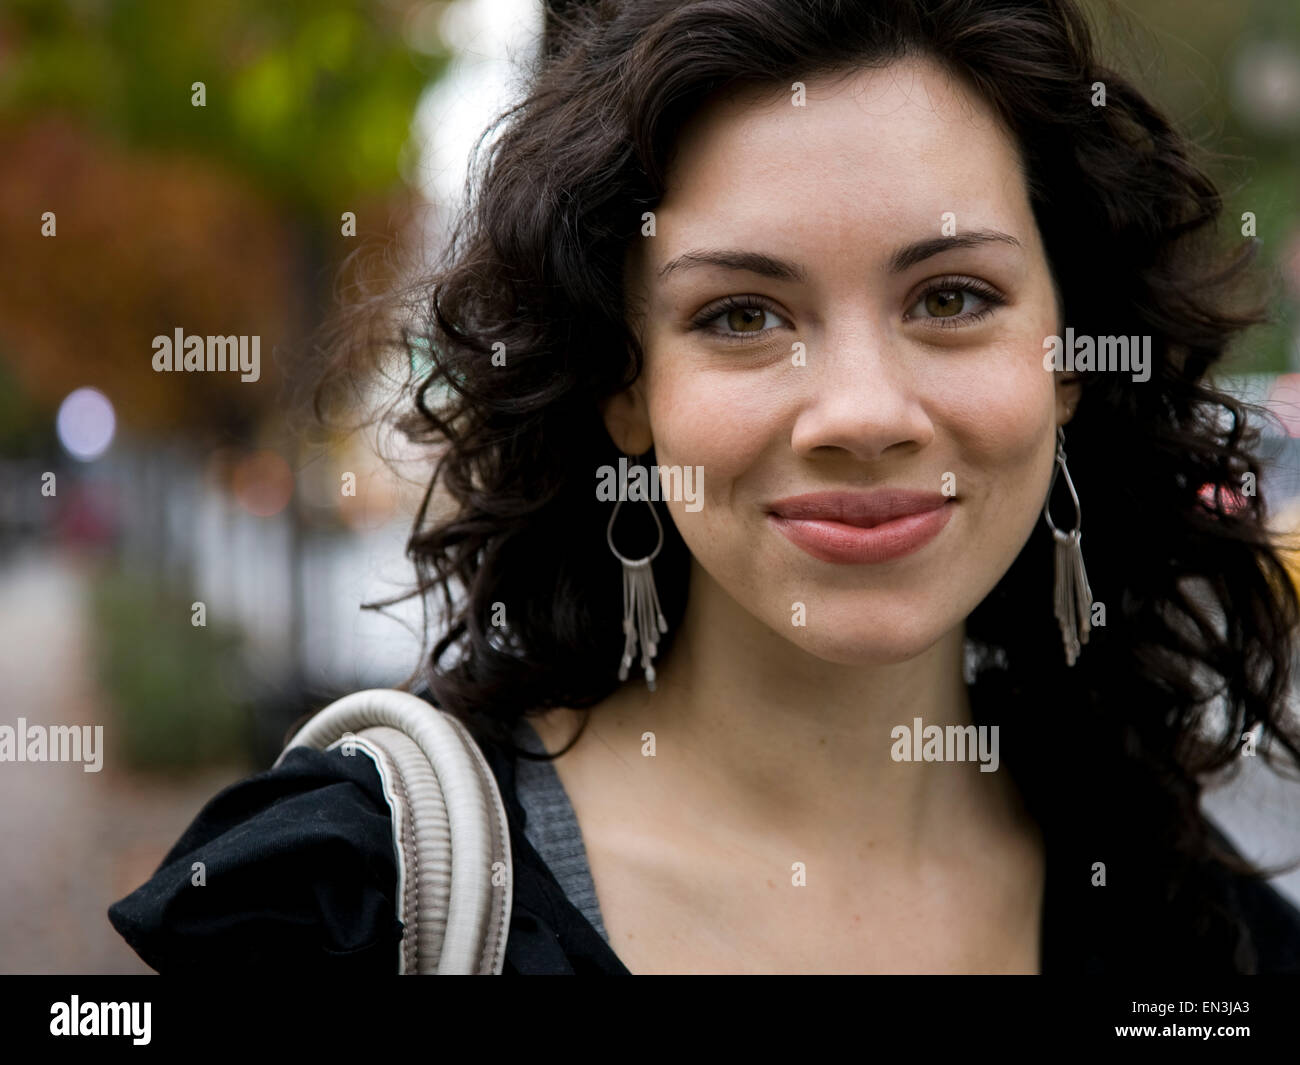 USA, New York, Manhattan, Greenwich Village, Portrait of smiling young woman Banque D'Images